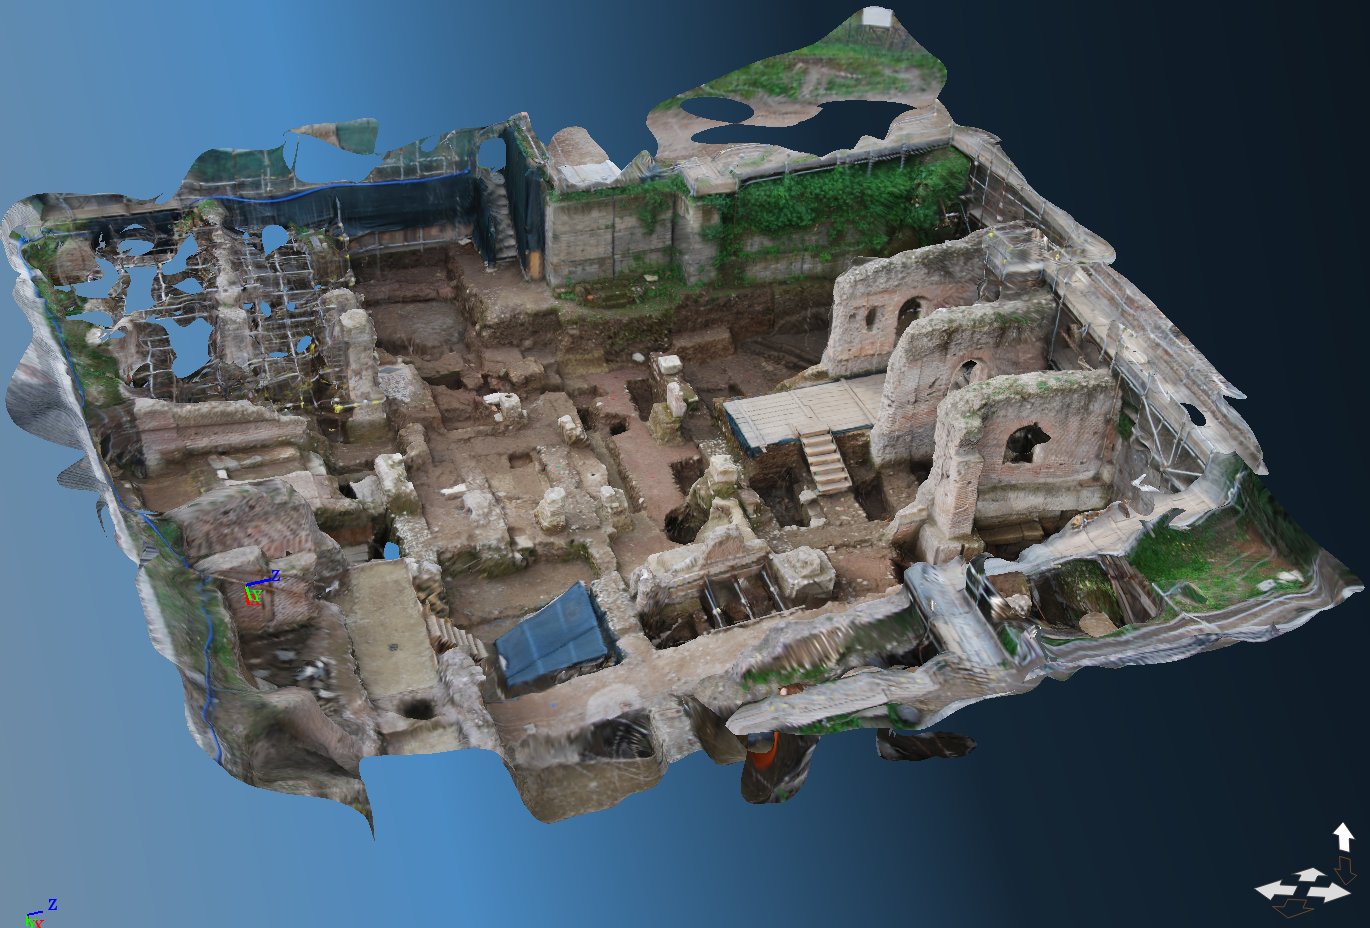 3d model of the Palatine hill excavation